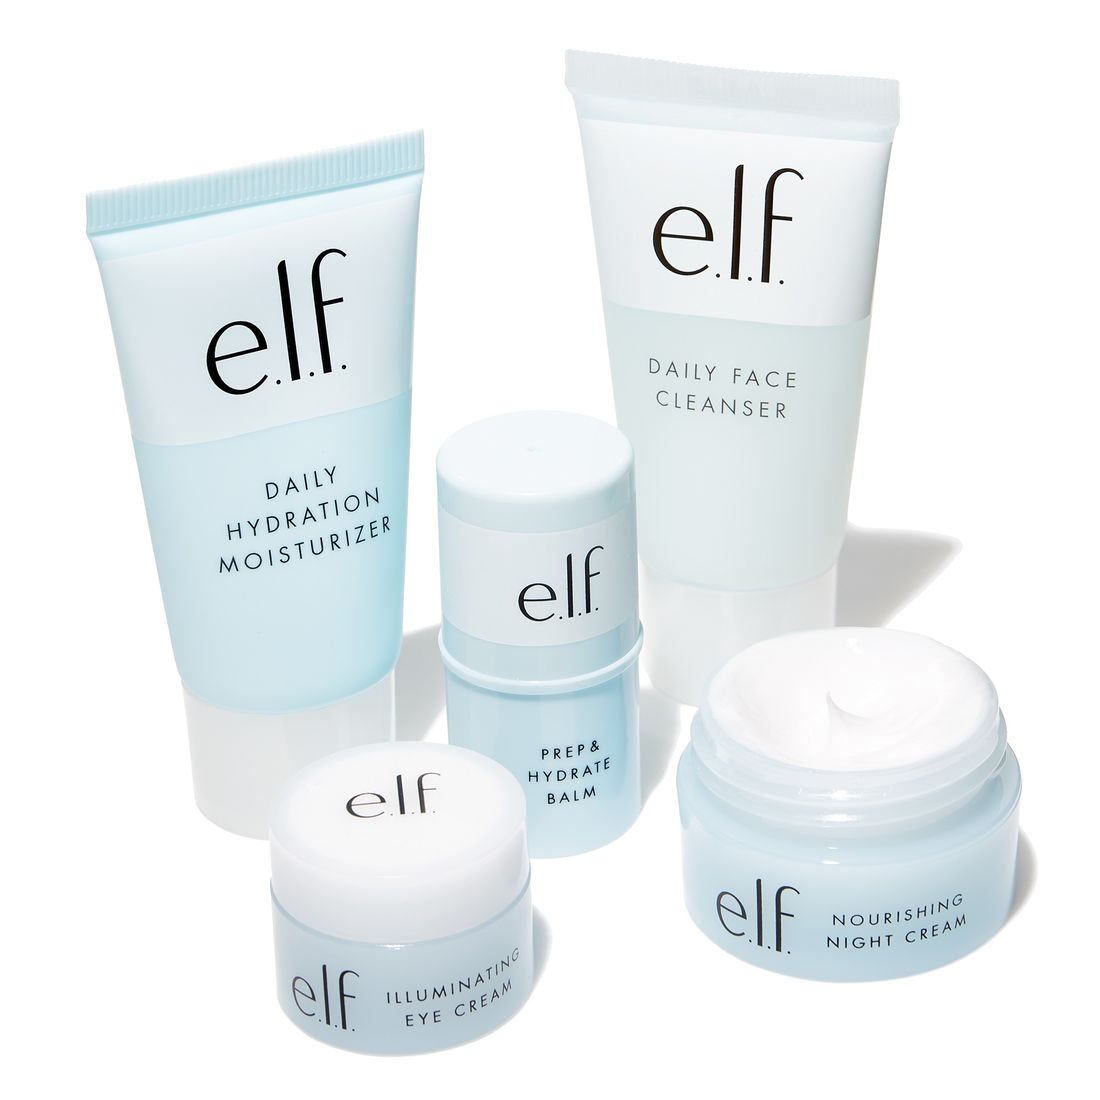 elf hydration kit winter christmas holiday shopping gift ideas | Ethical Bunny's cruelty free and vegan brand list with skincare, makeup, haircare, hygiene, bath and body guides. Featuring indie, clean, green, sustainable, non toxic, organic, botanical and natural products.